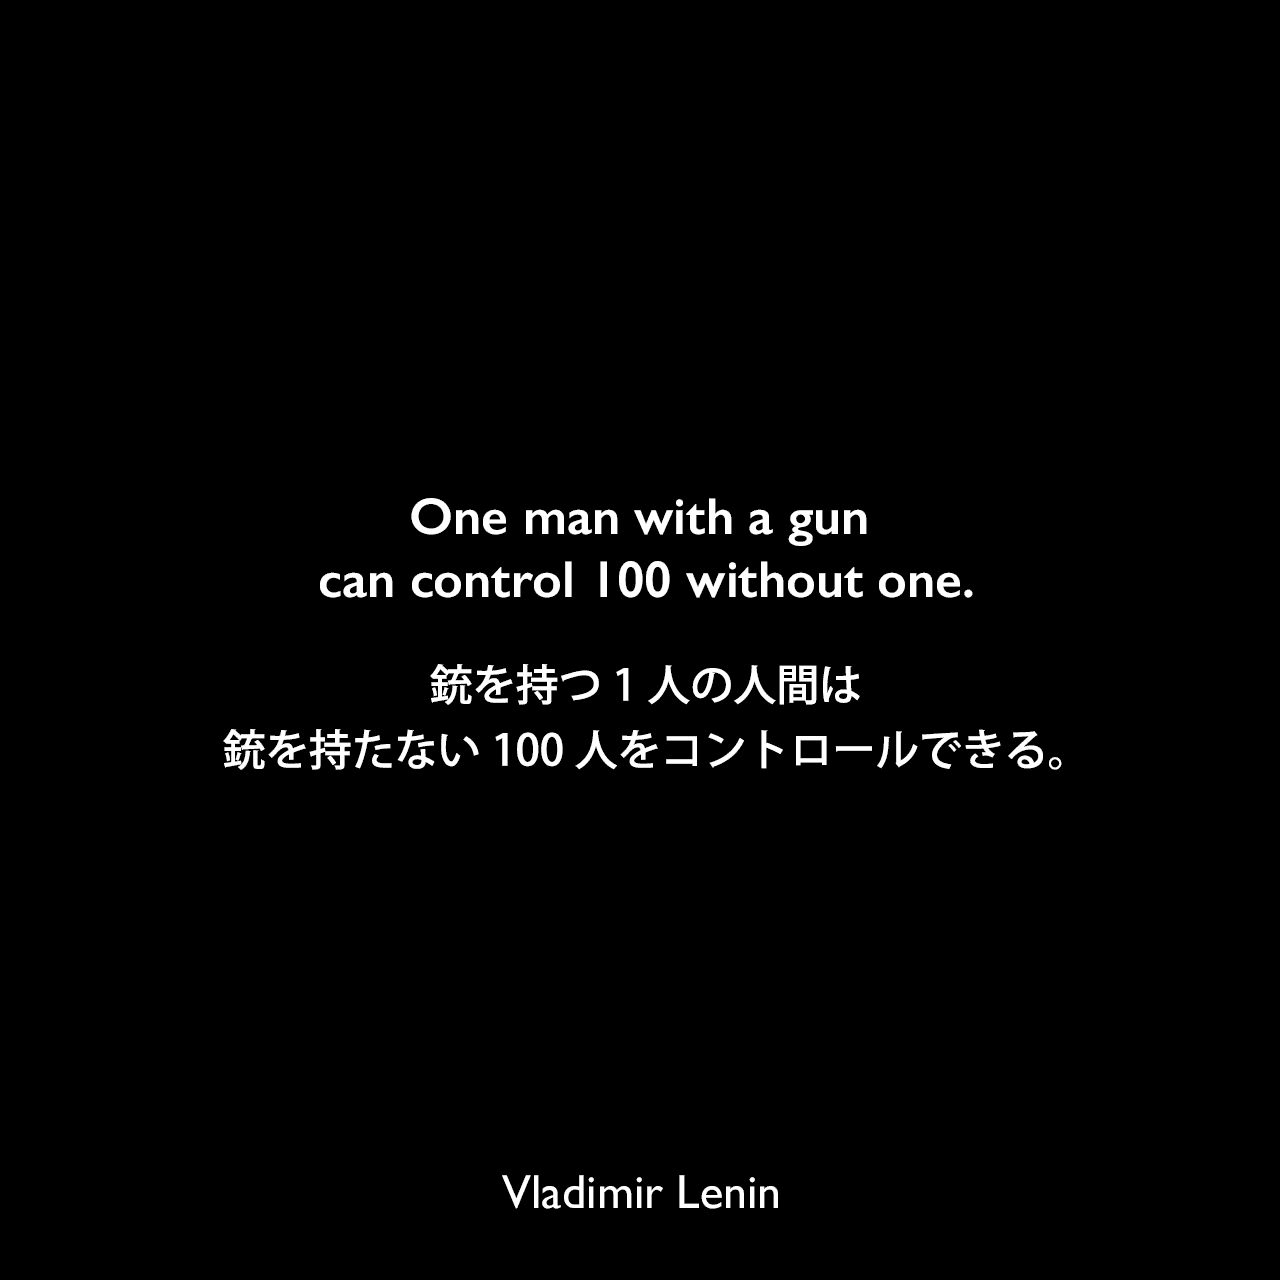 One man with a gun can control 100 without one.銃を持つ1人の人間は銃を持たない100人をコントロールできる。Vladimir Lenin